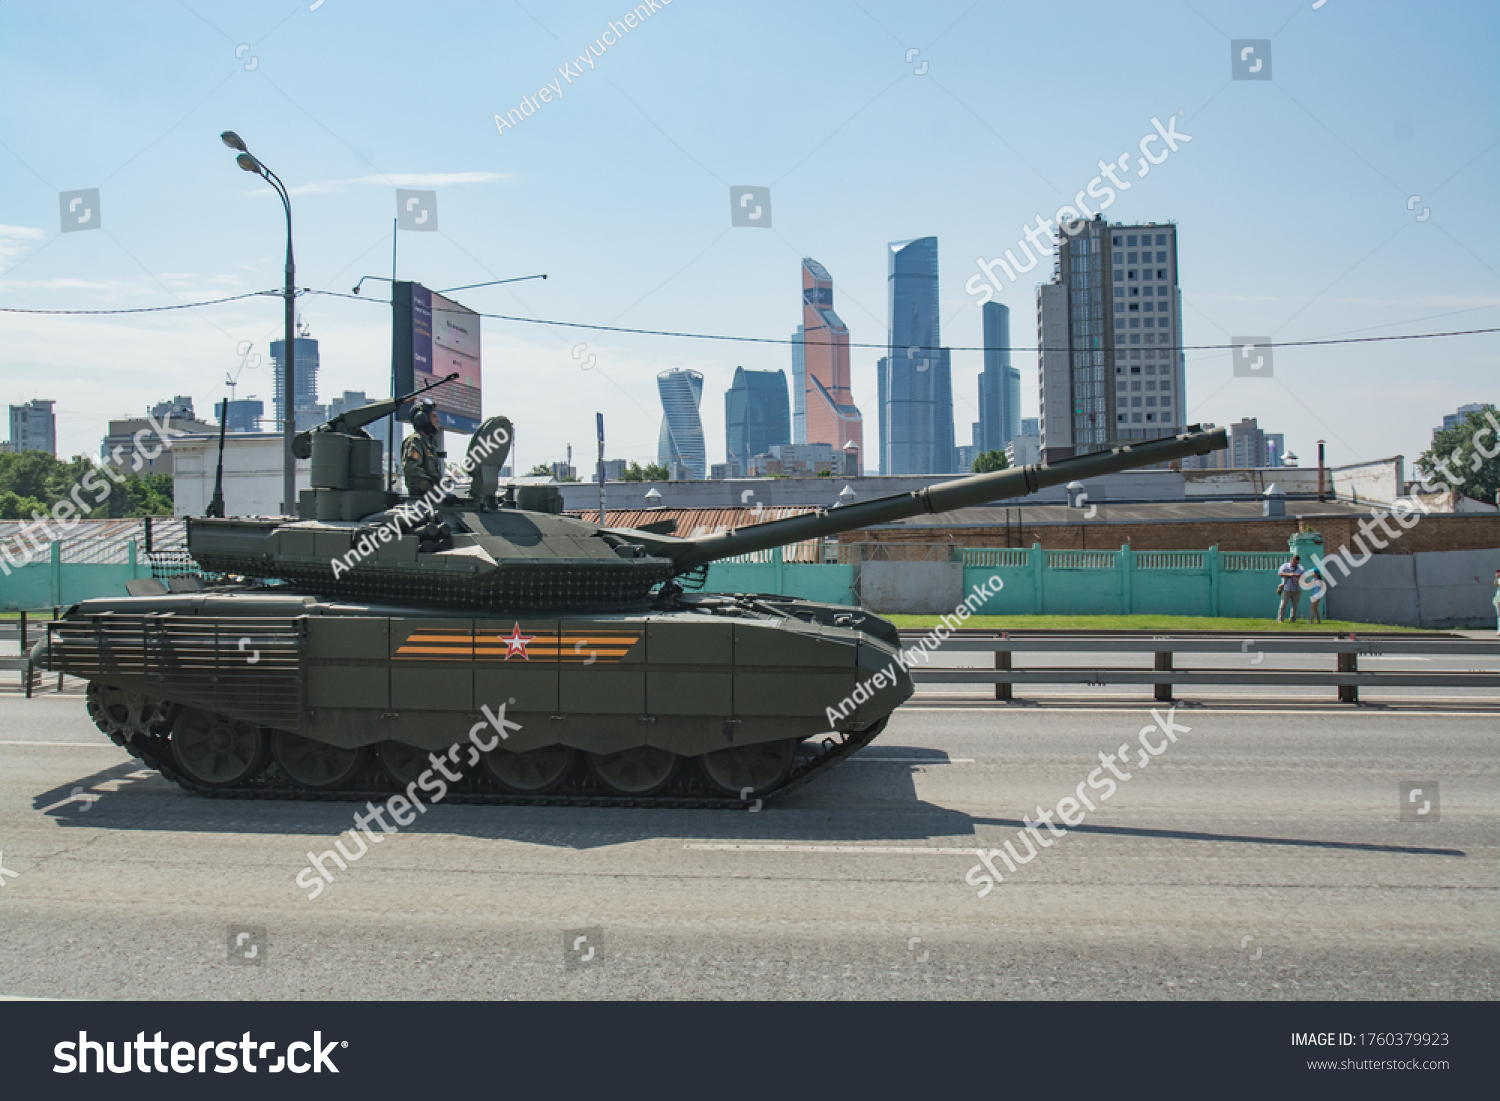 https://image.shutterstock.com/z/stock-photo-june-moscow-russia-the-t-m-tank-returns-after-participating-in-the-rehearsal-of-the-1760379923.jpg